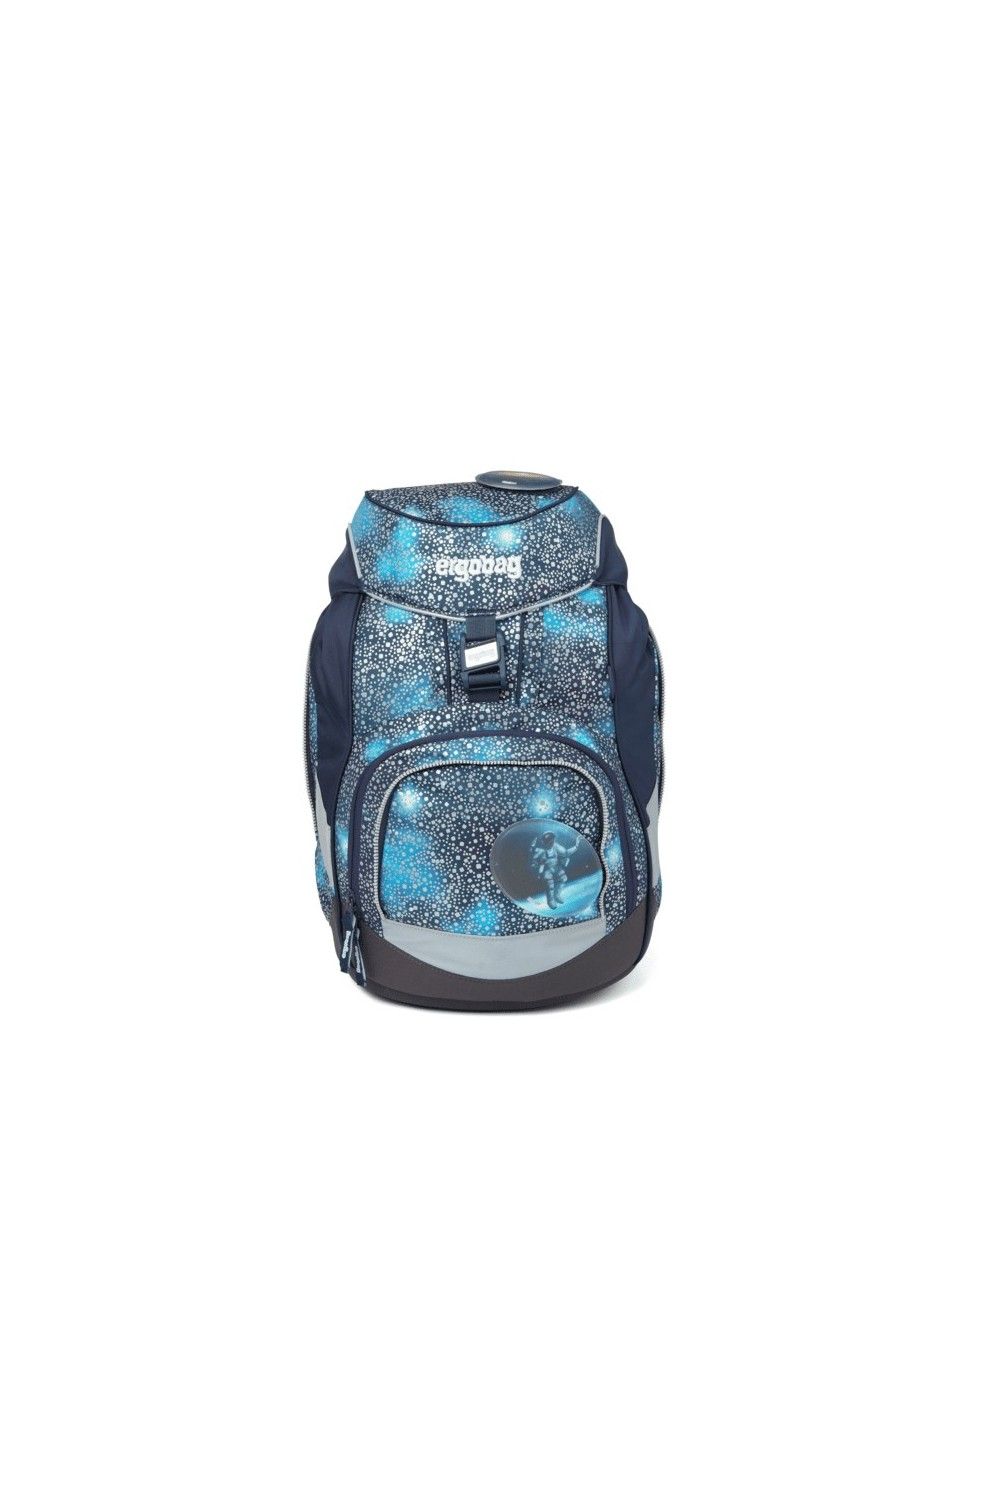 sac à dos scolaire pack ergobag 6 pièces Limited Edition Bär Anhalter durch Galaxis